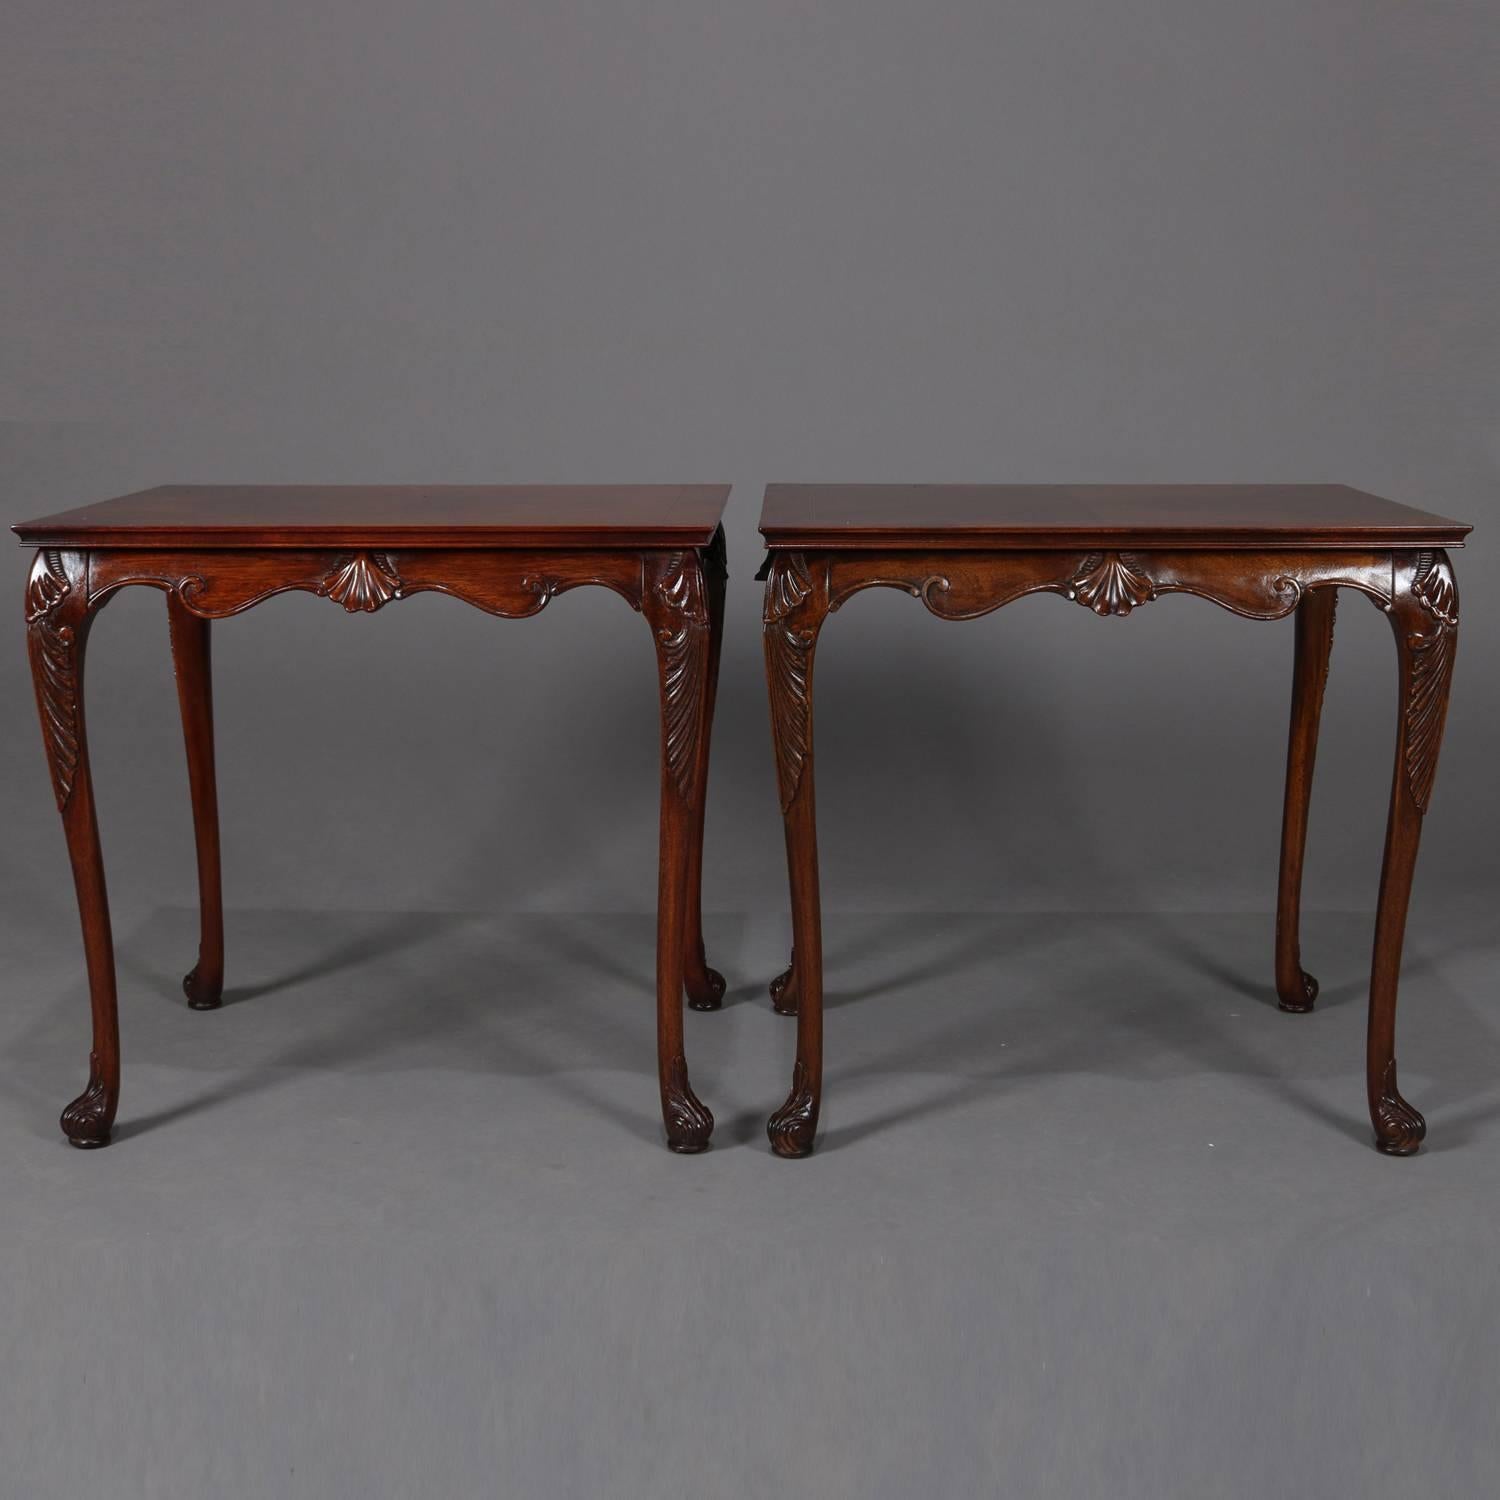 Pair of Carved and Bookmatched Flame Mahogany Baker School End Tables circa 1930 10